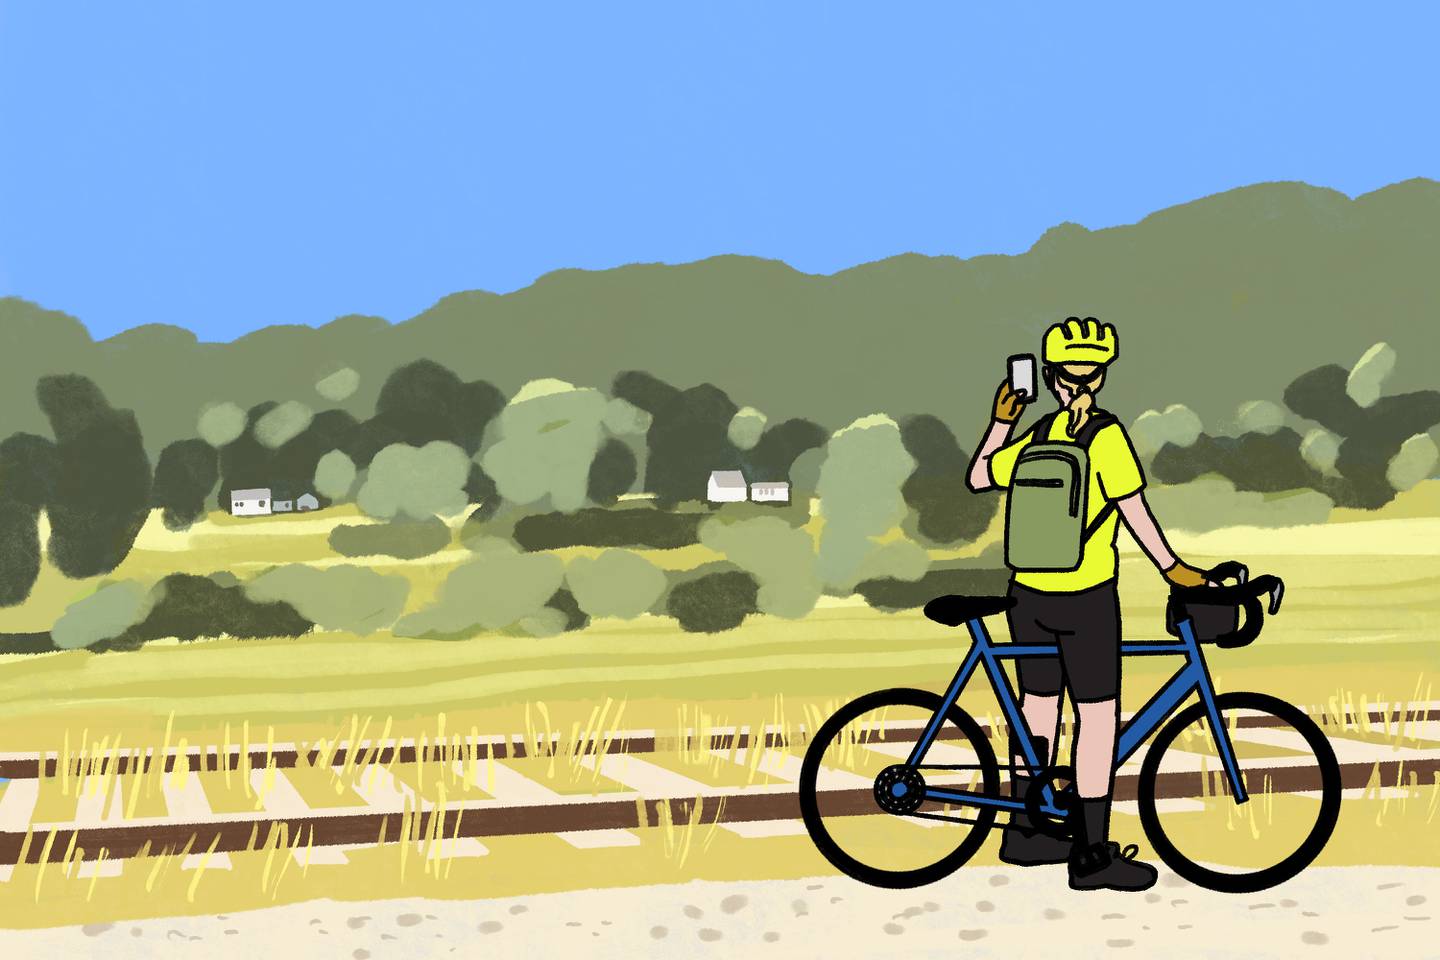 Illustration from behind of woman with helmet and backpack standing over a bicycle, taking a photo with her phone of a rural landscape. There are old railroad tracks overgrown with grass in the foreground, hills, trees and small country houses in the background.